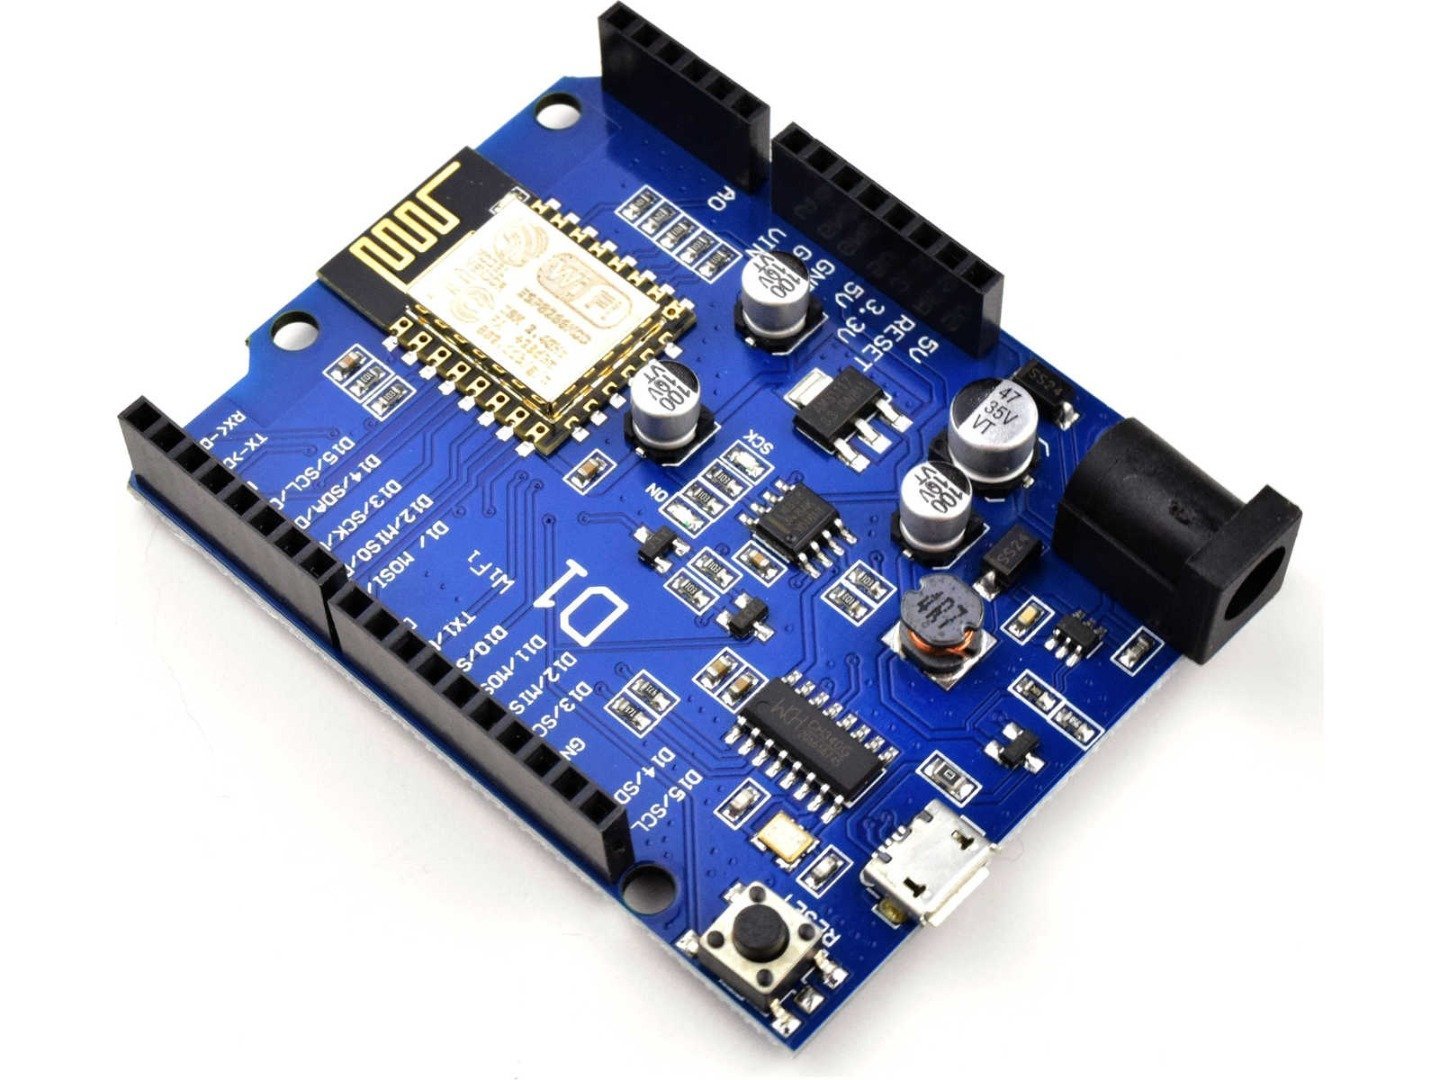 WEMOS D1 ESP8266 Wi-Fi Board 80-160MHz – IoT – compatible with Arduino and NodeMCU 4